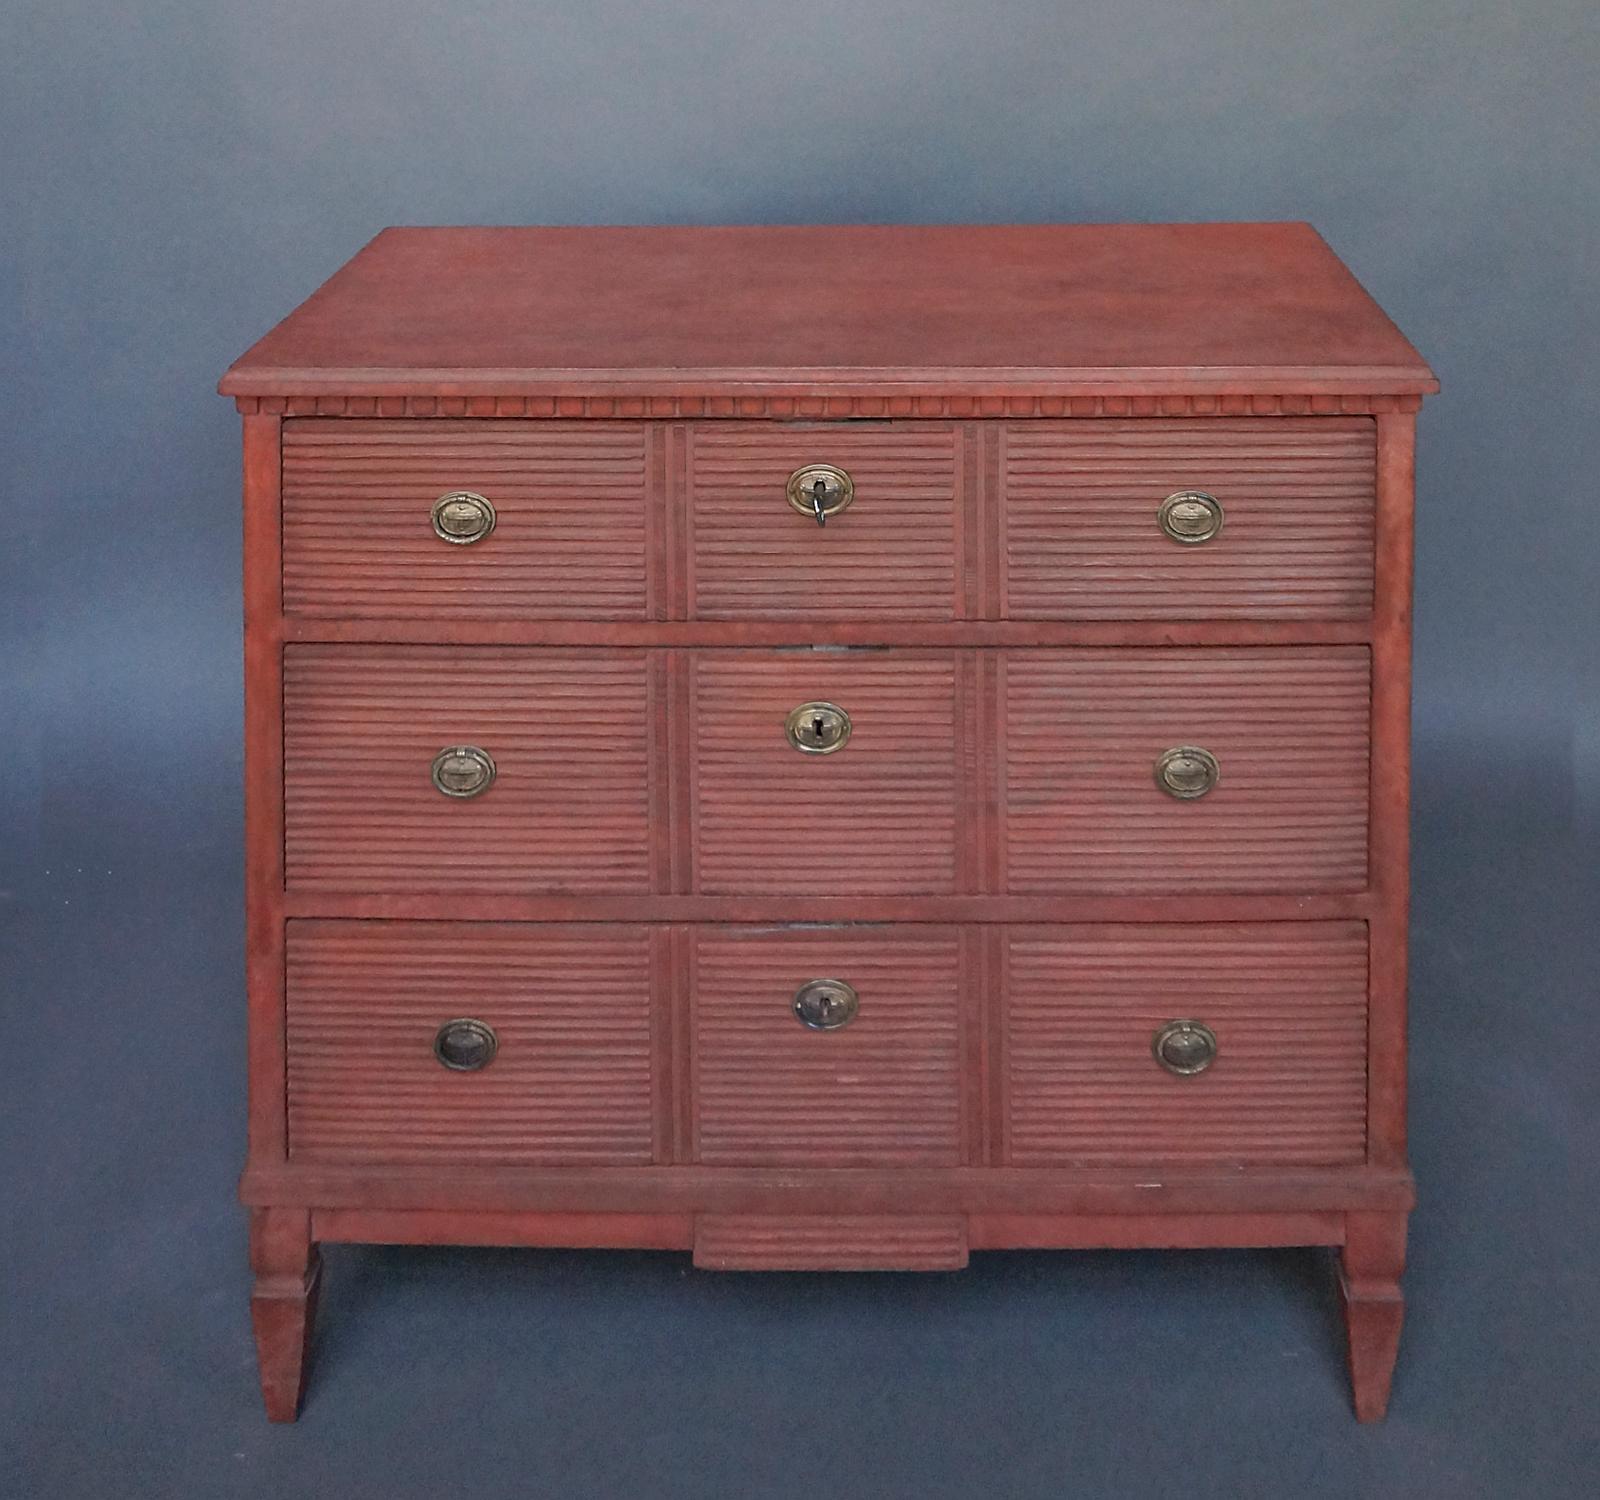 Three drawer chest in the Gustavian Style, Sweden, circa 1910, in a rich red ochre paint. The drawer fronts have horizontal reeding divided into three panels, with brass pulls and escutcheons. Dentil molding at the top, shaped apron, and tapering